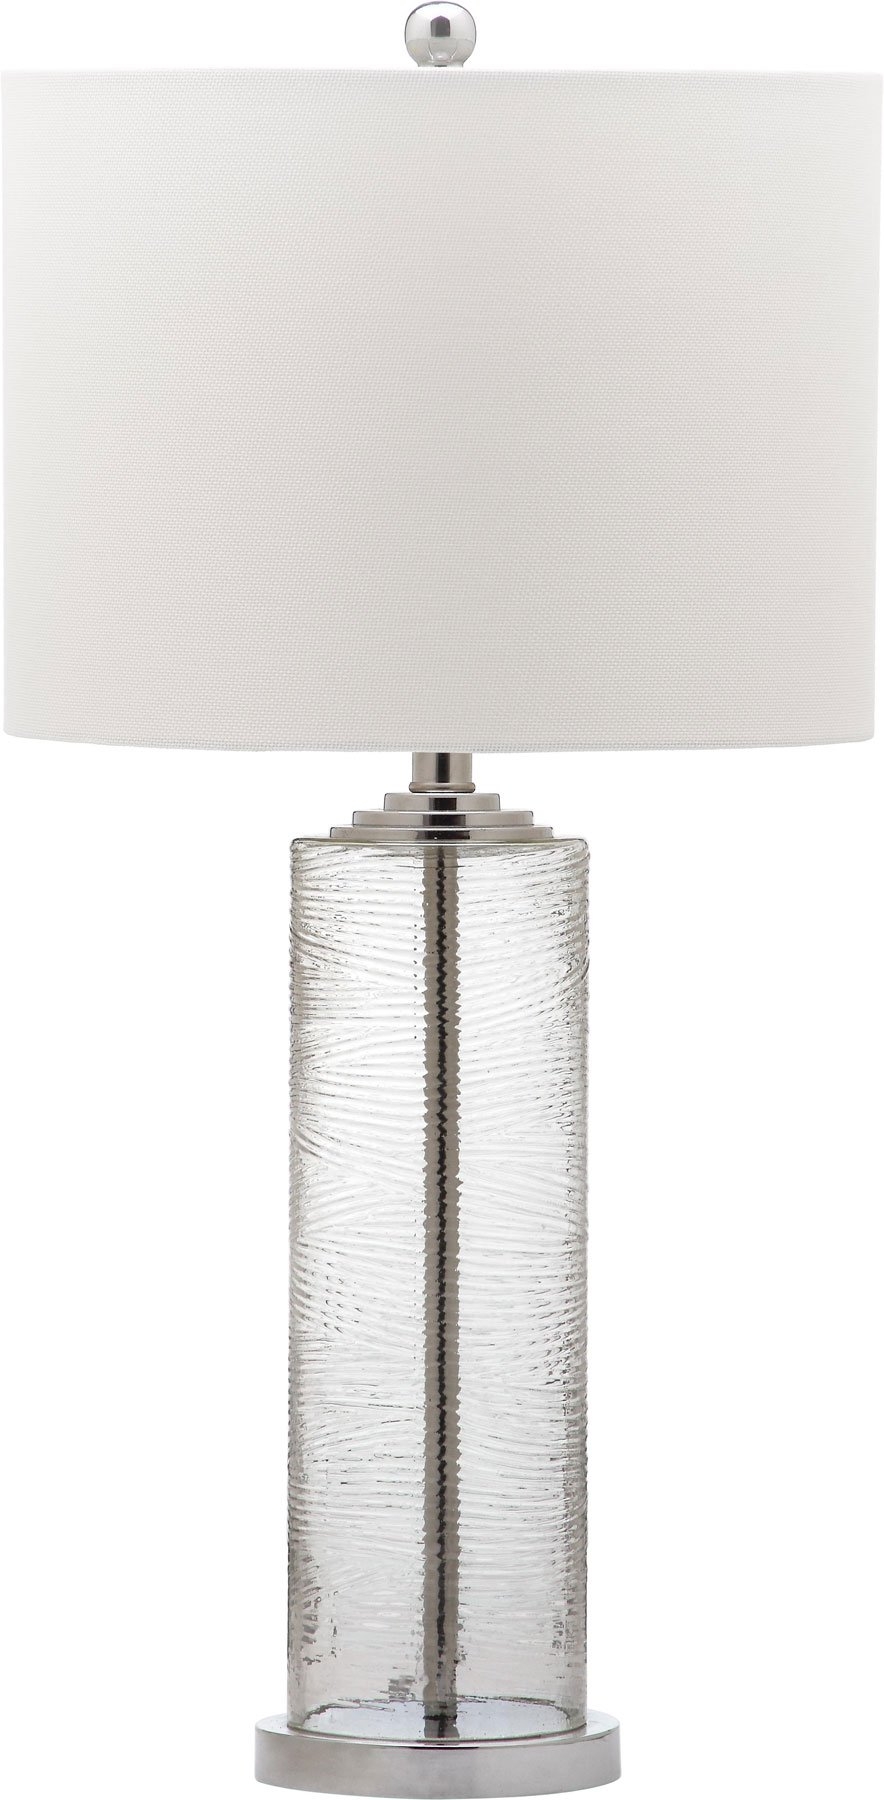 Grant 29-Inch H Table Lamp - Clear - Safavieh - Image 2